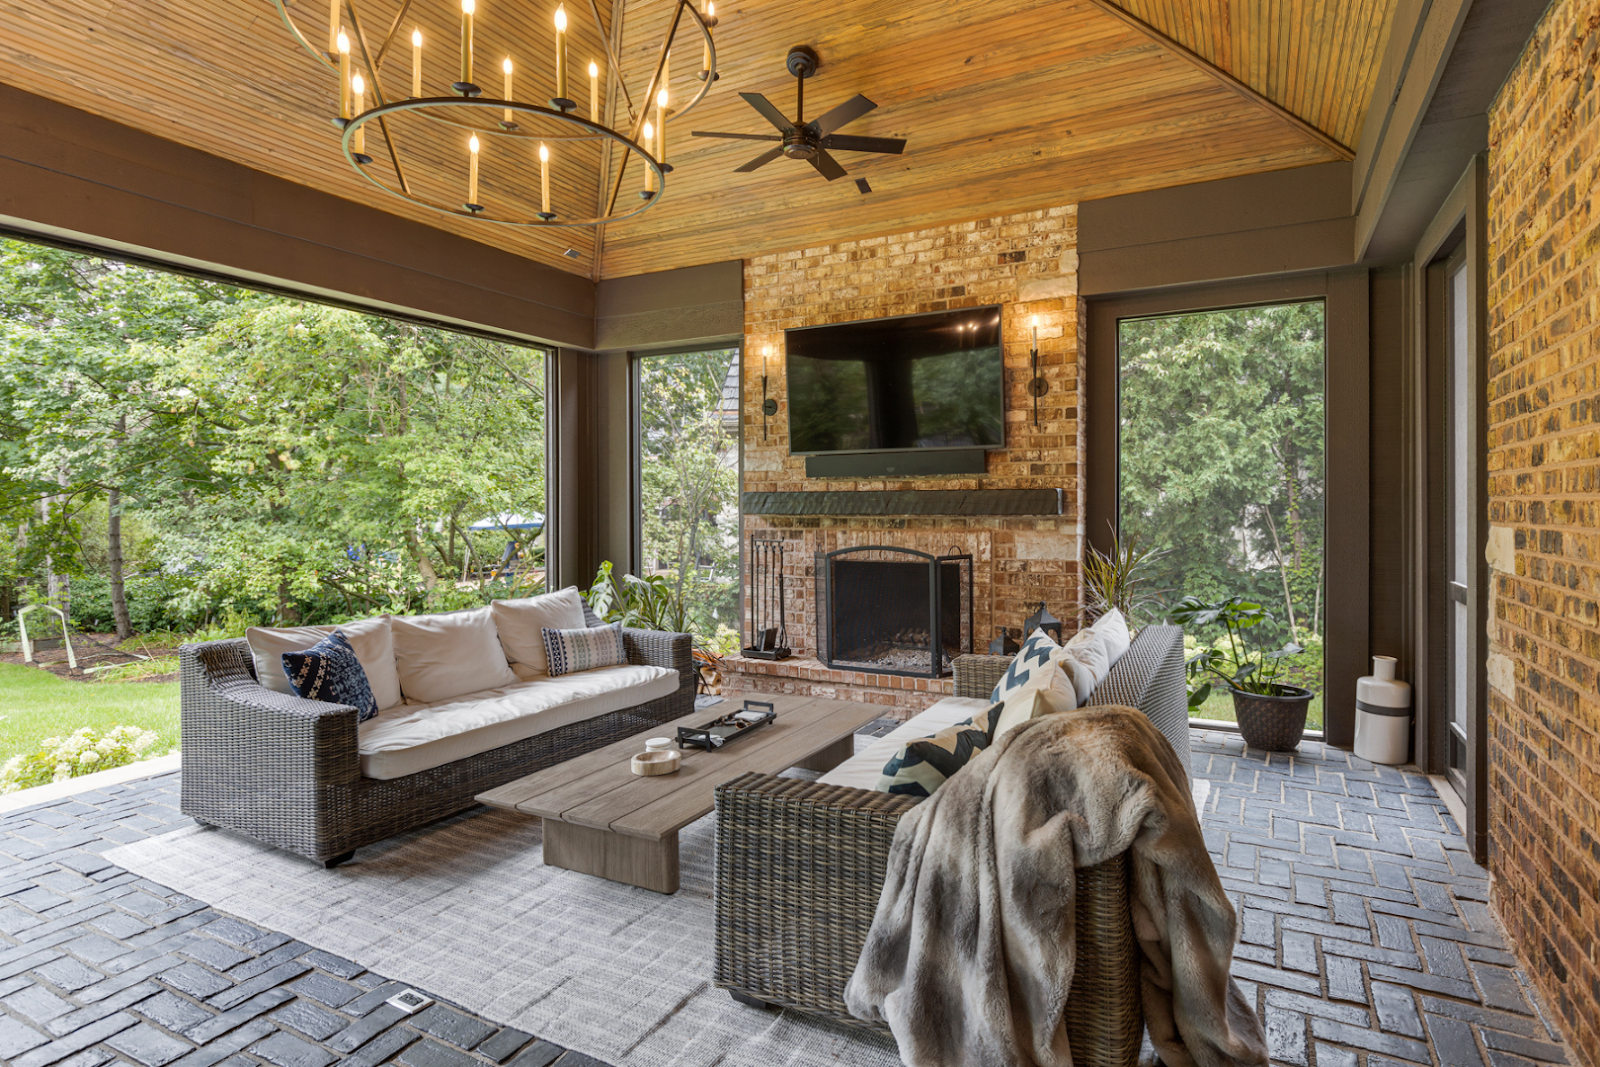 An outdoor covered porch with brick fireplace and dual couch seating makes a great conversational spot